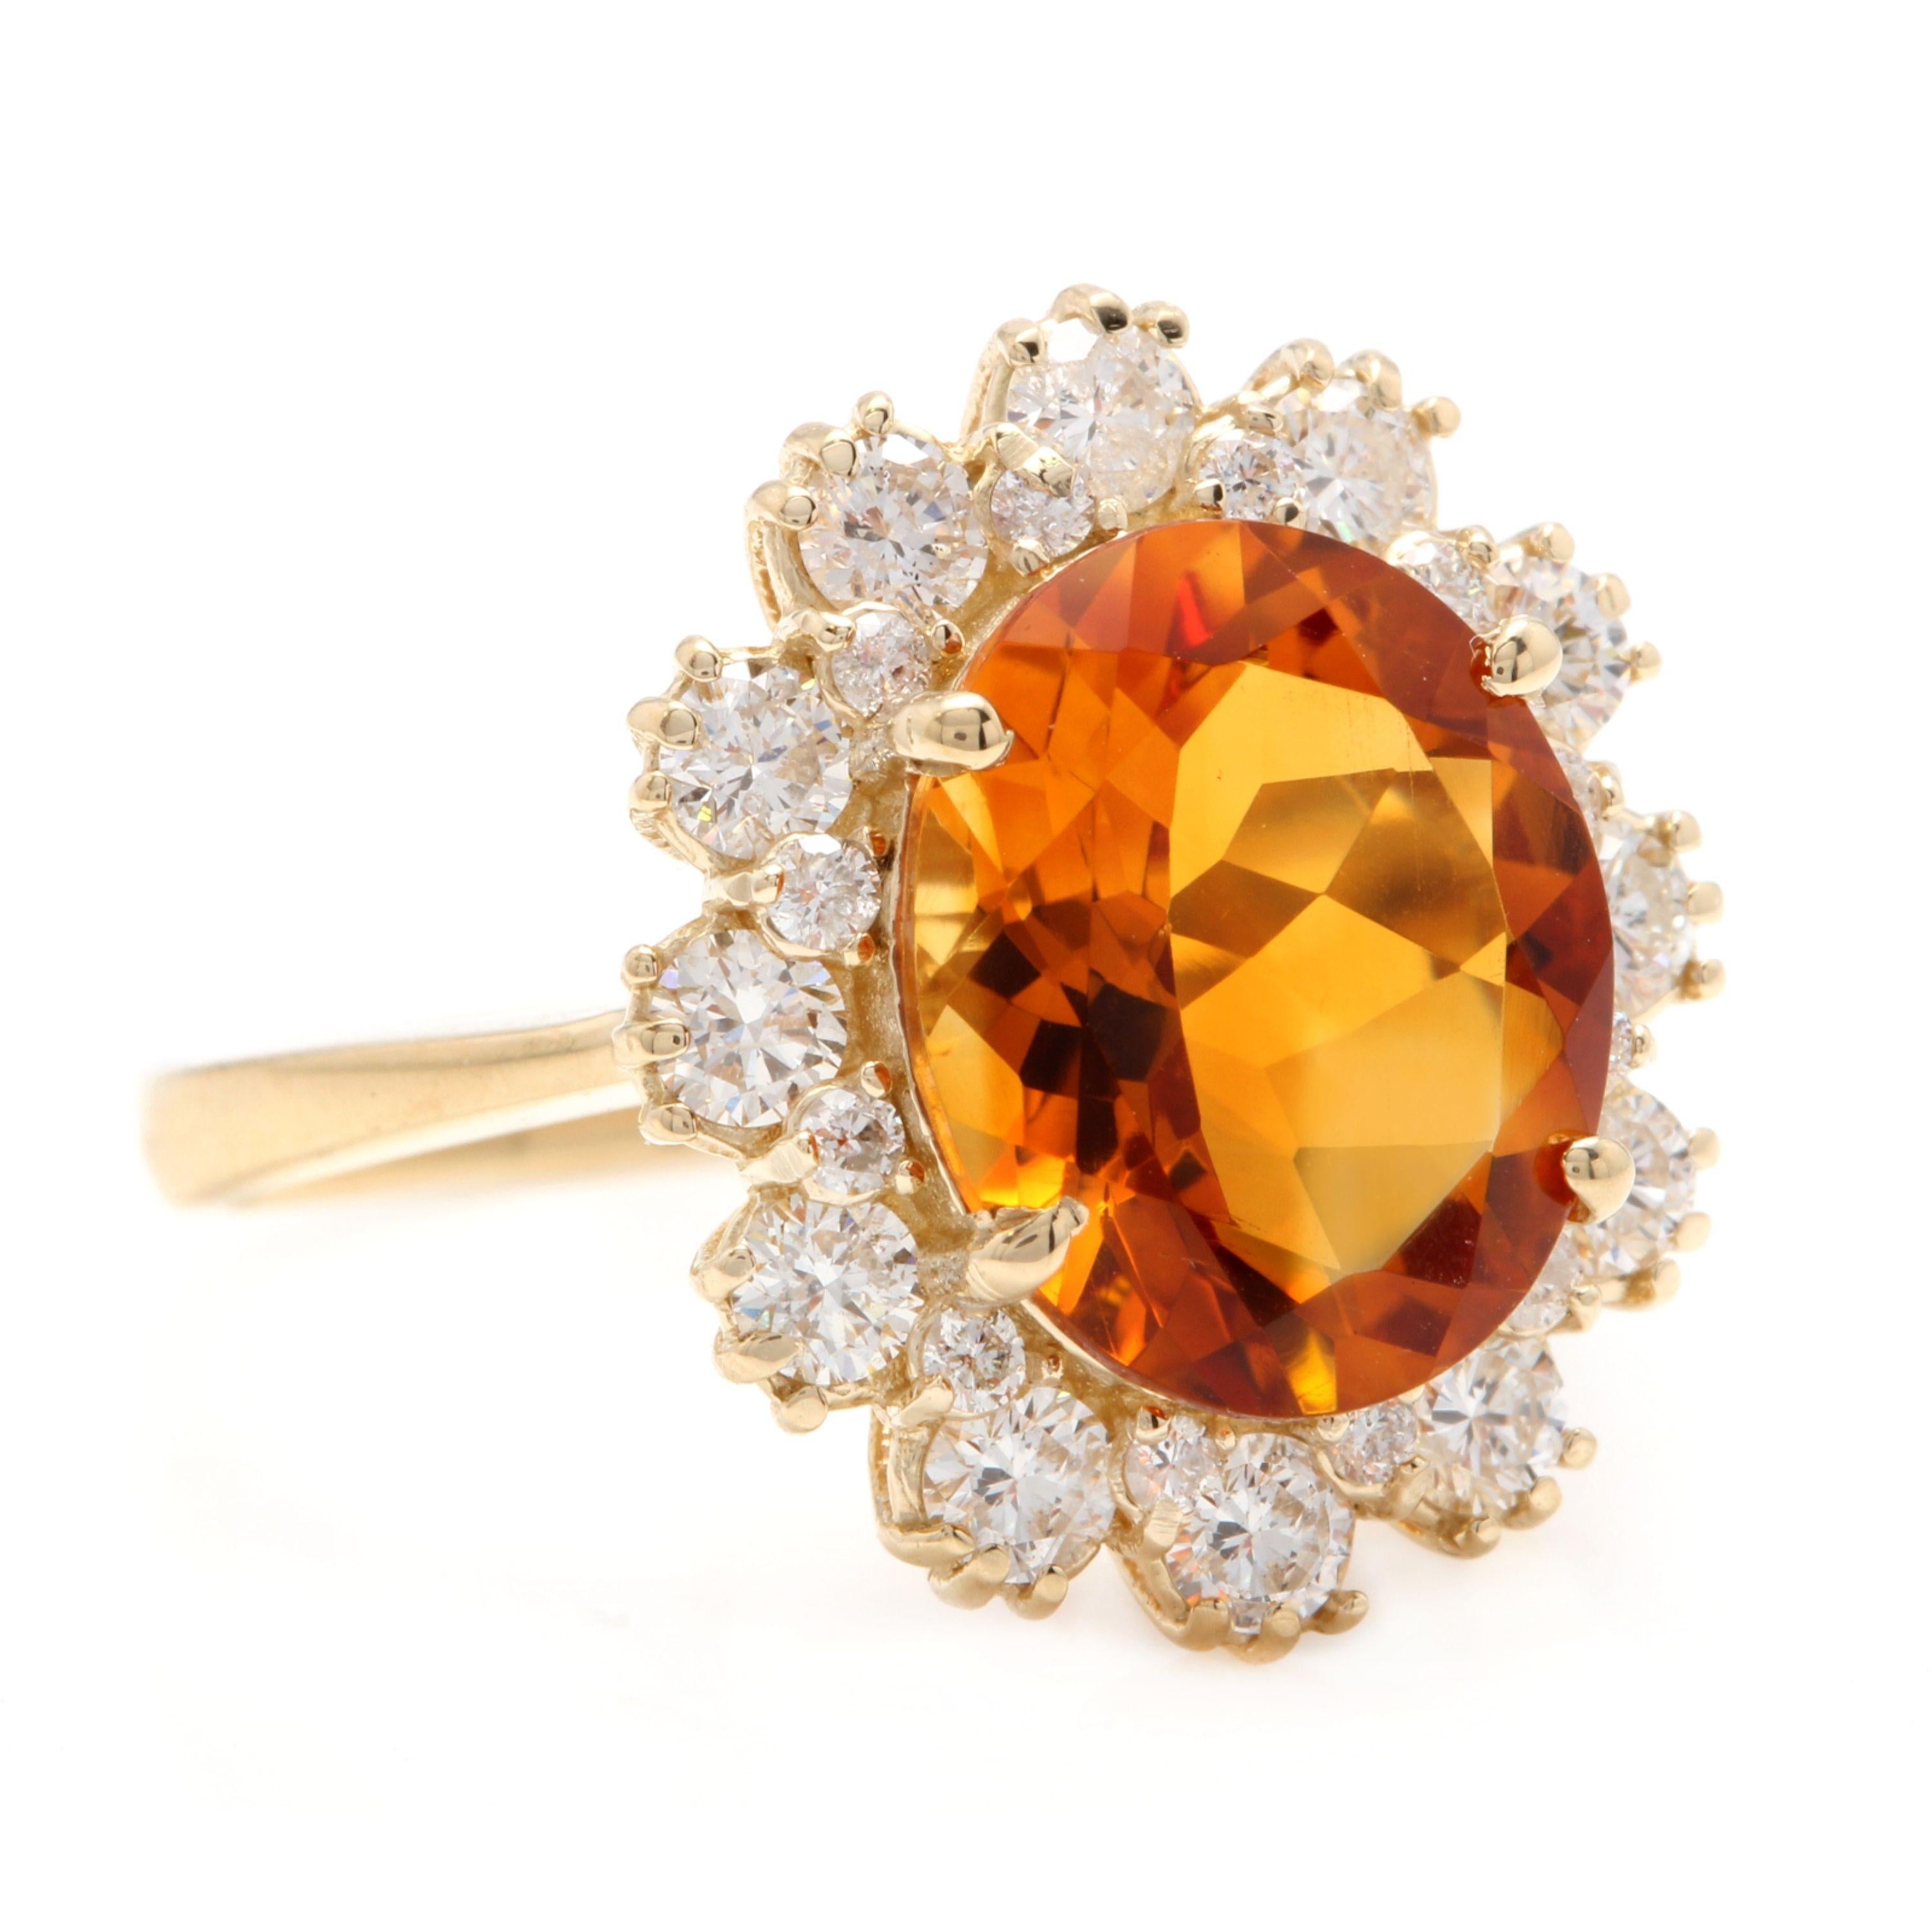 7.15 Carats Exquisite Natural Madeira Citrine and Diamond 14K Solid Yellow Gold Ring

Total Natural Citrine Weights: 6.00 Carats

Citrine Measures: 12 x 10mm

Natural Round Diamonds Weight: 1.15 Carats (color G-H / Clarity Si1-SI2)

Ring size: 7 (we